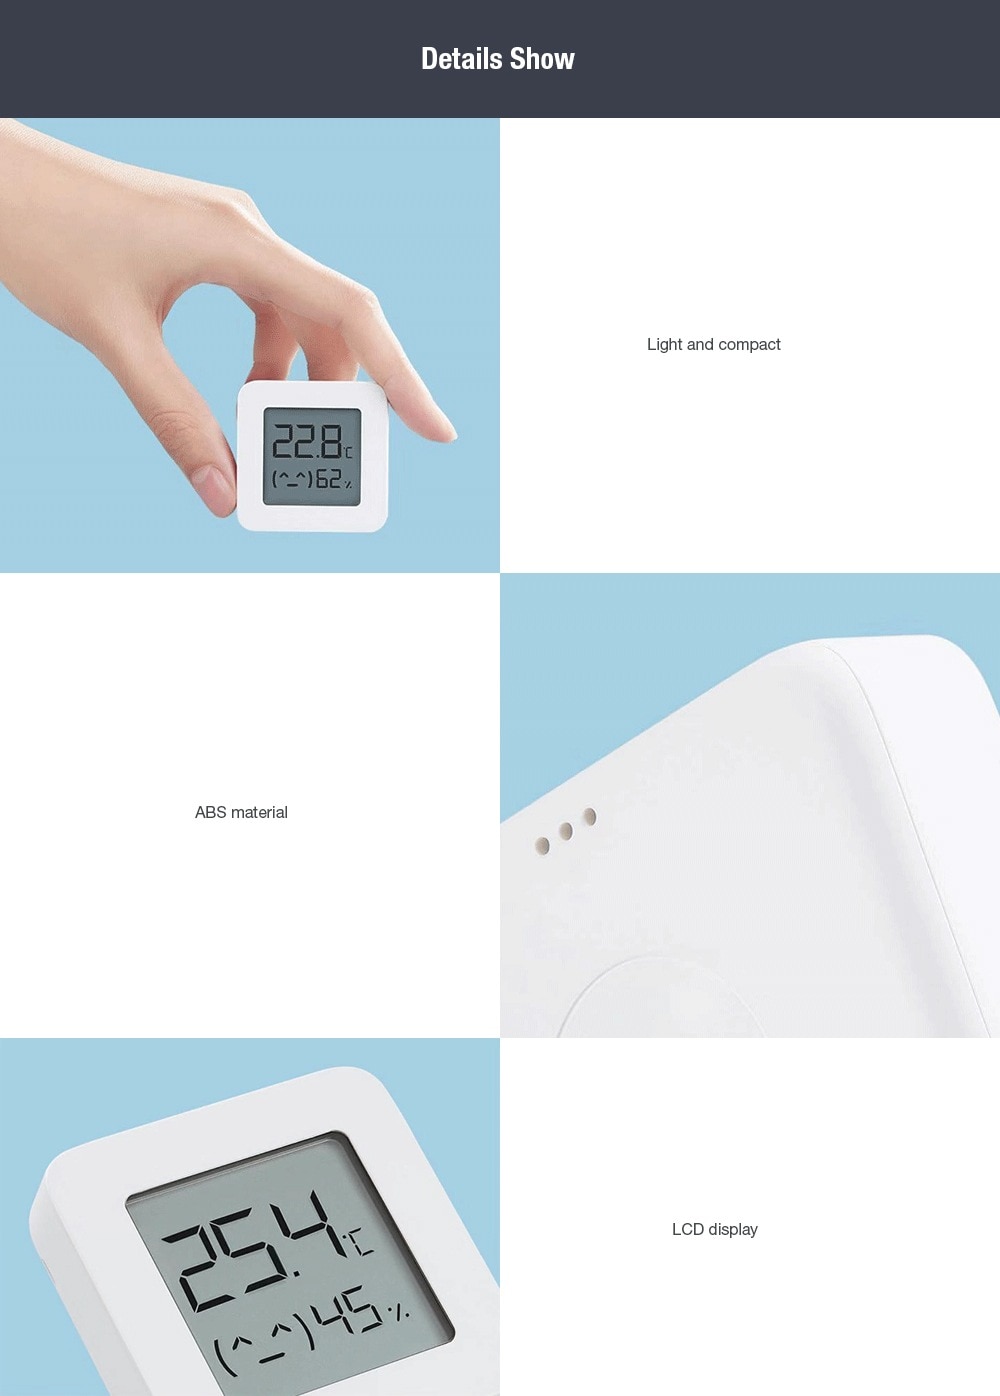 [Newest Version] XIAOMI Mijia Bluetooth Thermometer 2 Wireless Smart Electric Digital Hygrometer Thermometer Work with Mijia APP (7)